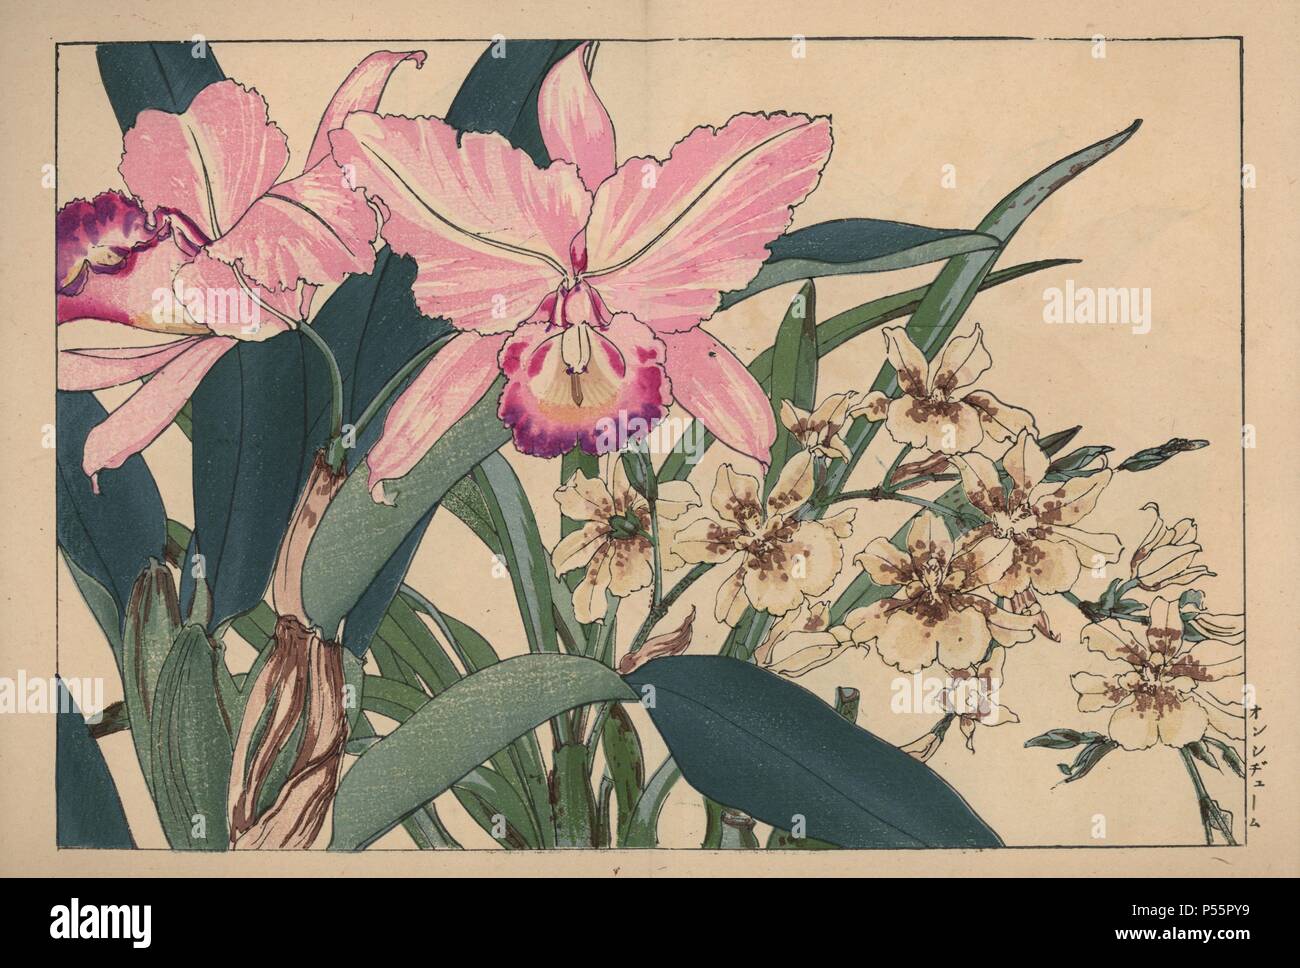 Oncidium and Laelia anceps orchids. Handcoloured woodblock print from Konan Tanigami's 'Seiyou Sokazufu' (Pictorial Album of Western Plants and Flowers: Autumn Winter), Unsodo, Kyoto, 1917. Tanigami (1879-1928) depicted 125 varieties of garden plants through the four seasons. Stock Photo